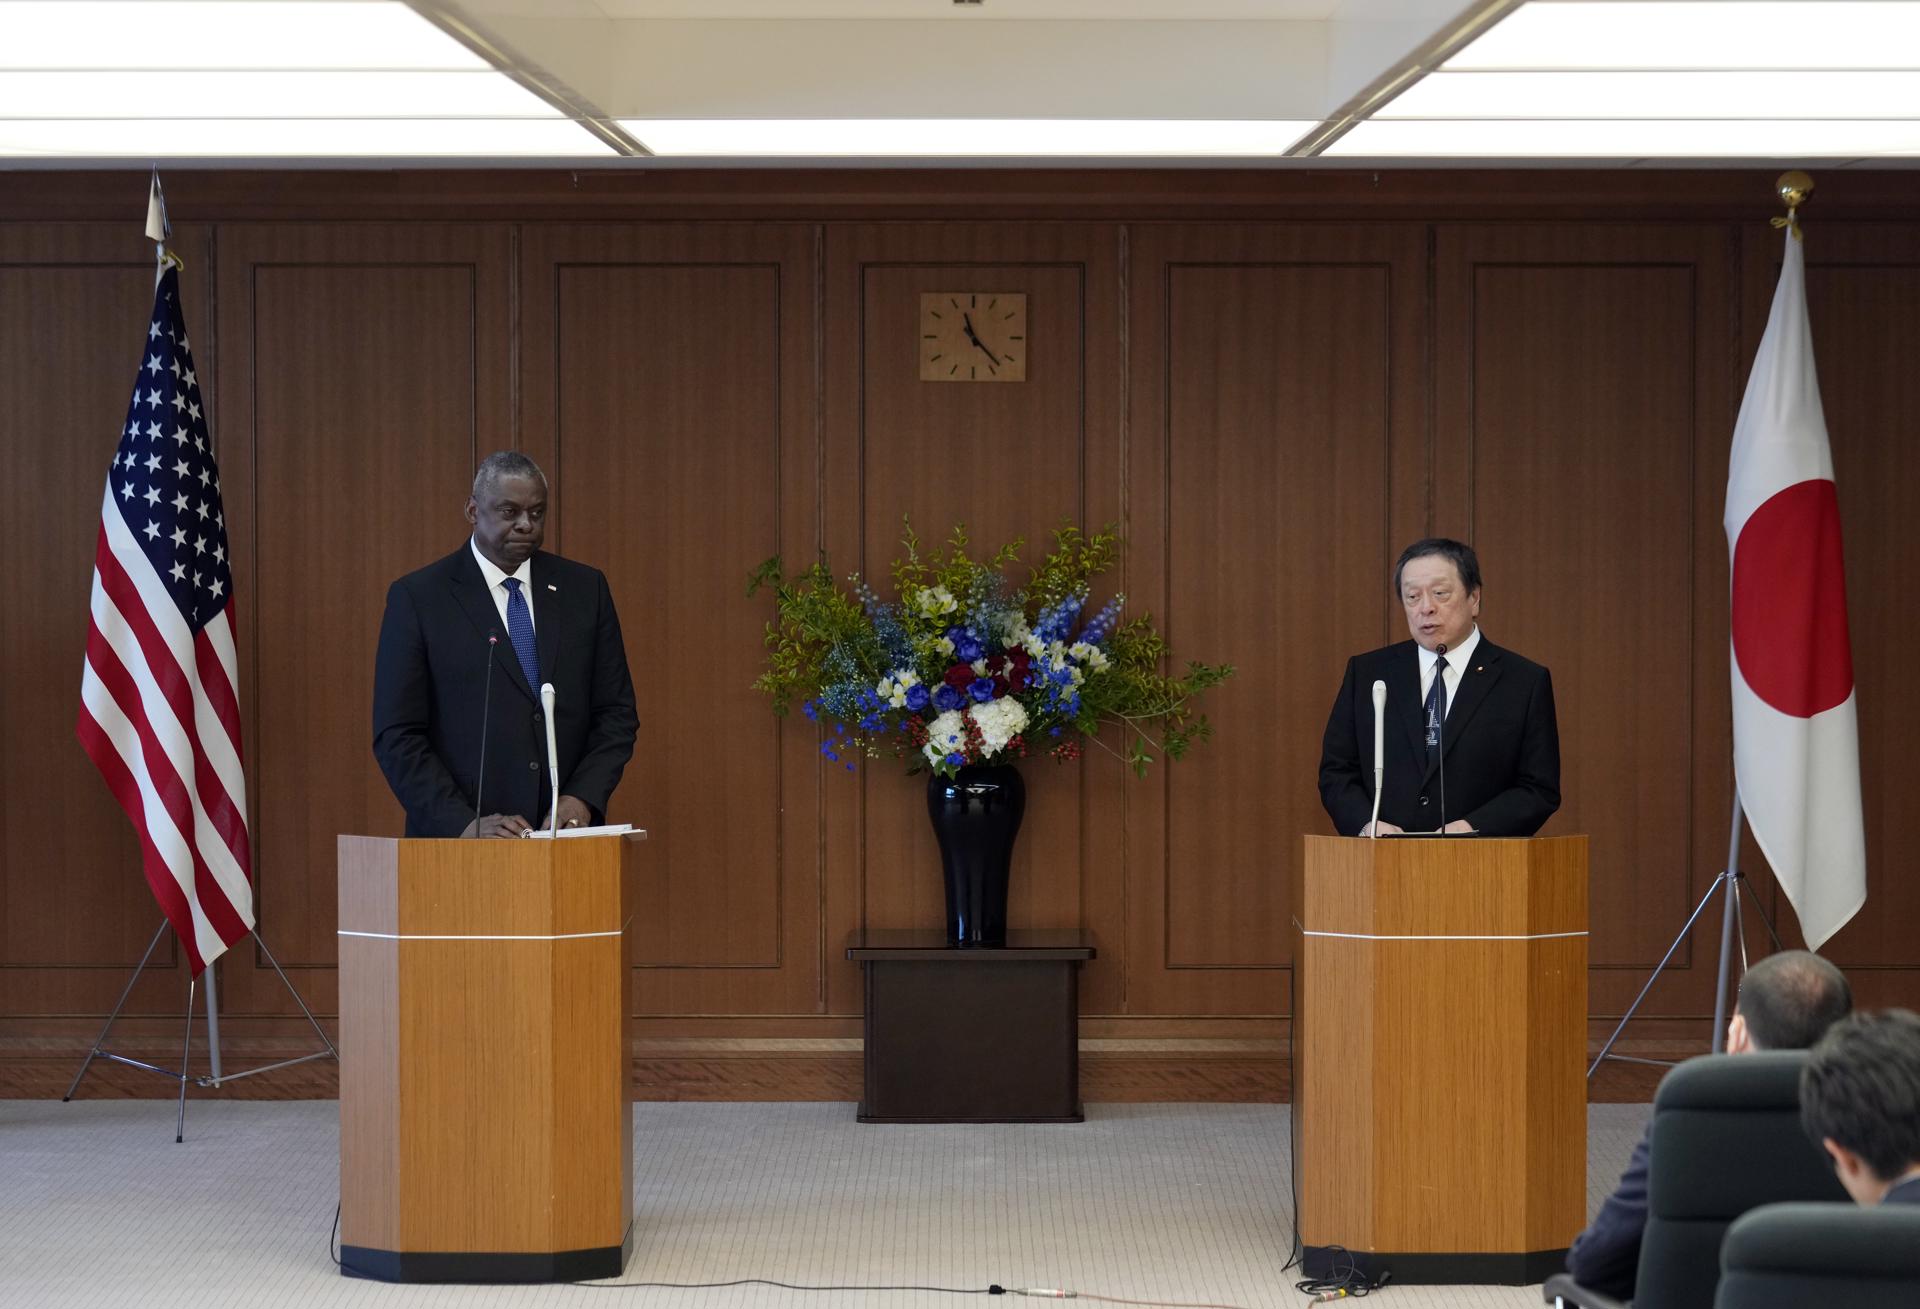 US Secretary of Defense Lloyd Austin (L) and Japanese Defense Minister Yasukazu Hamada (R) attend a joint press conference after their meeting at the Japanese Defense Ministry in Tokyo, Japan, 01 June 2023. EFE-EPA/FRANCK ROBICHON / POOL